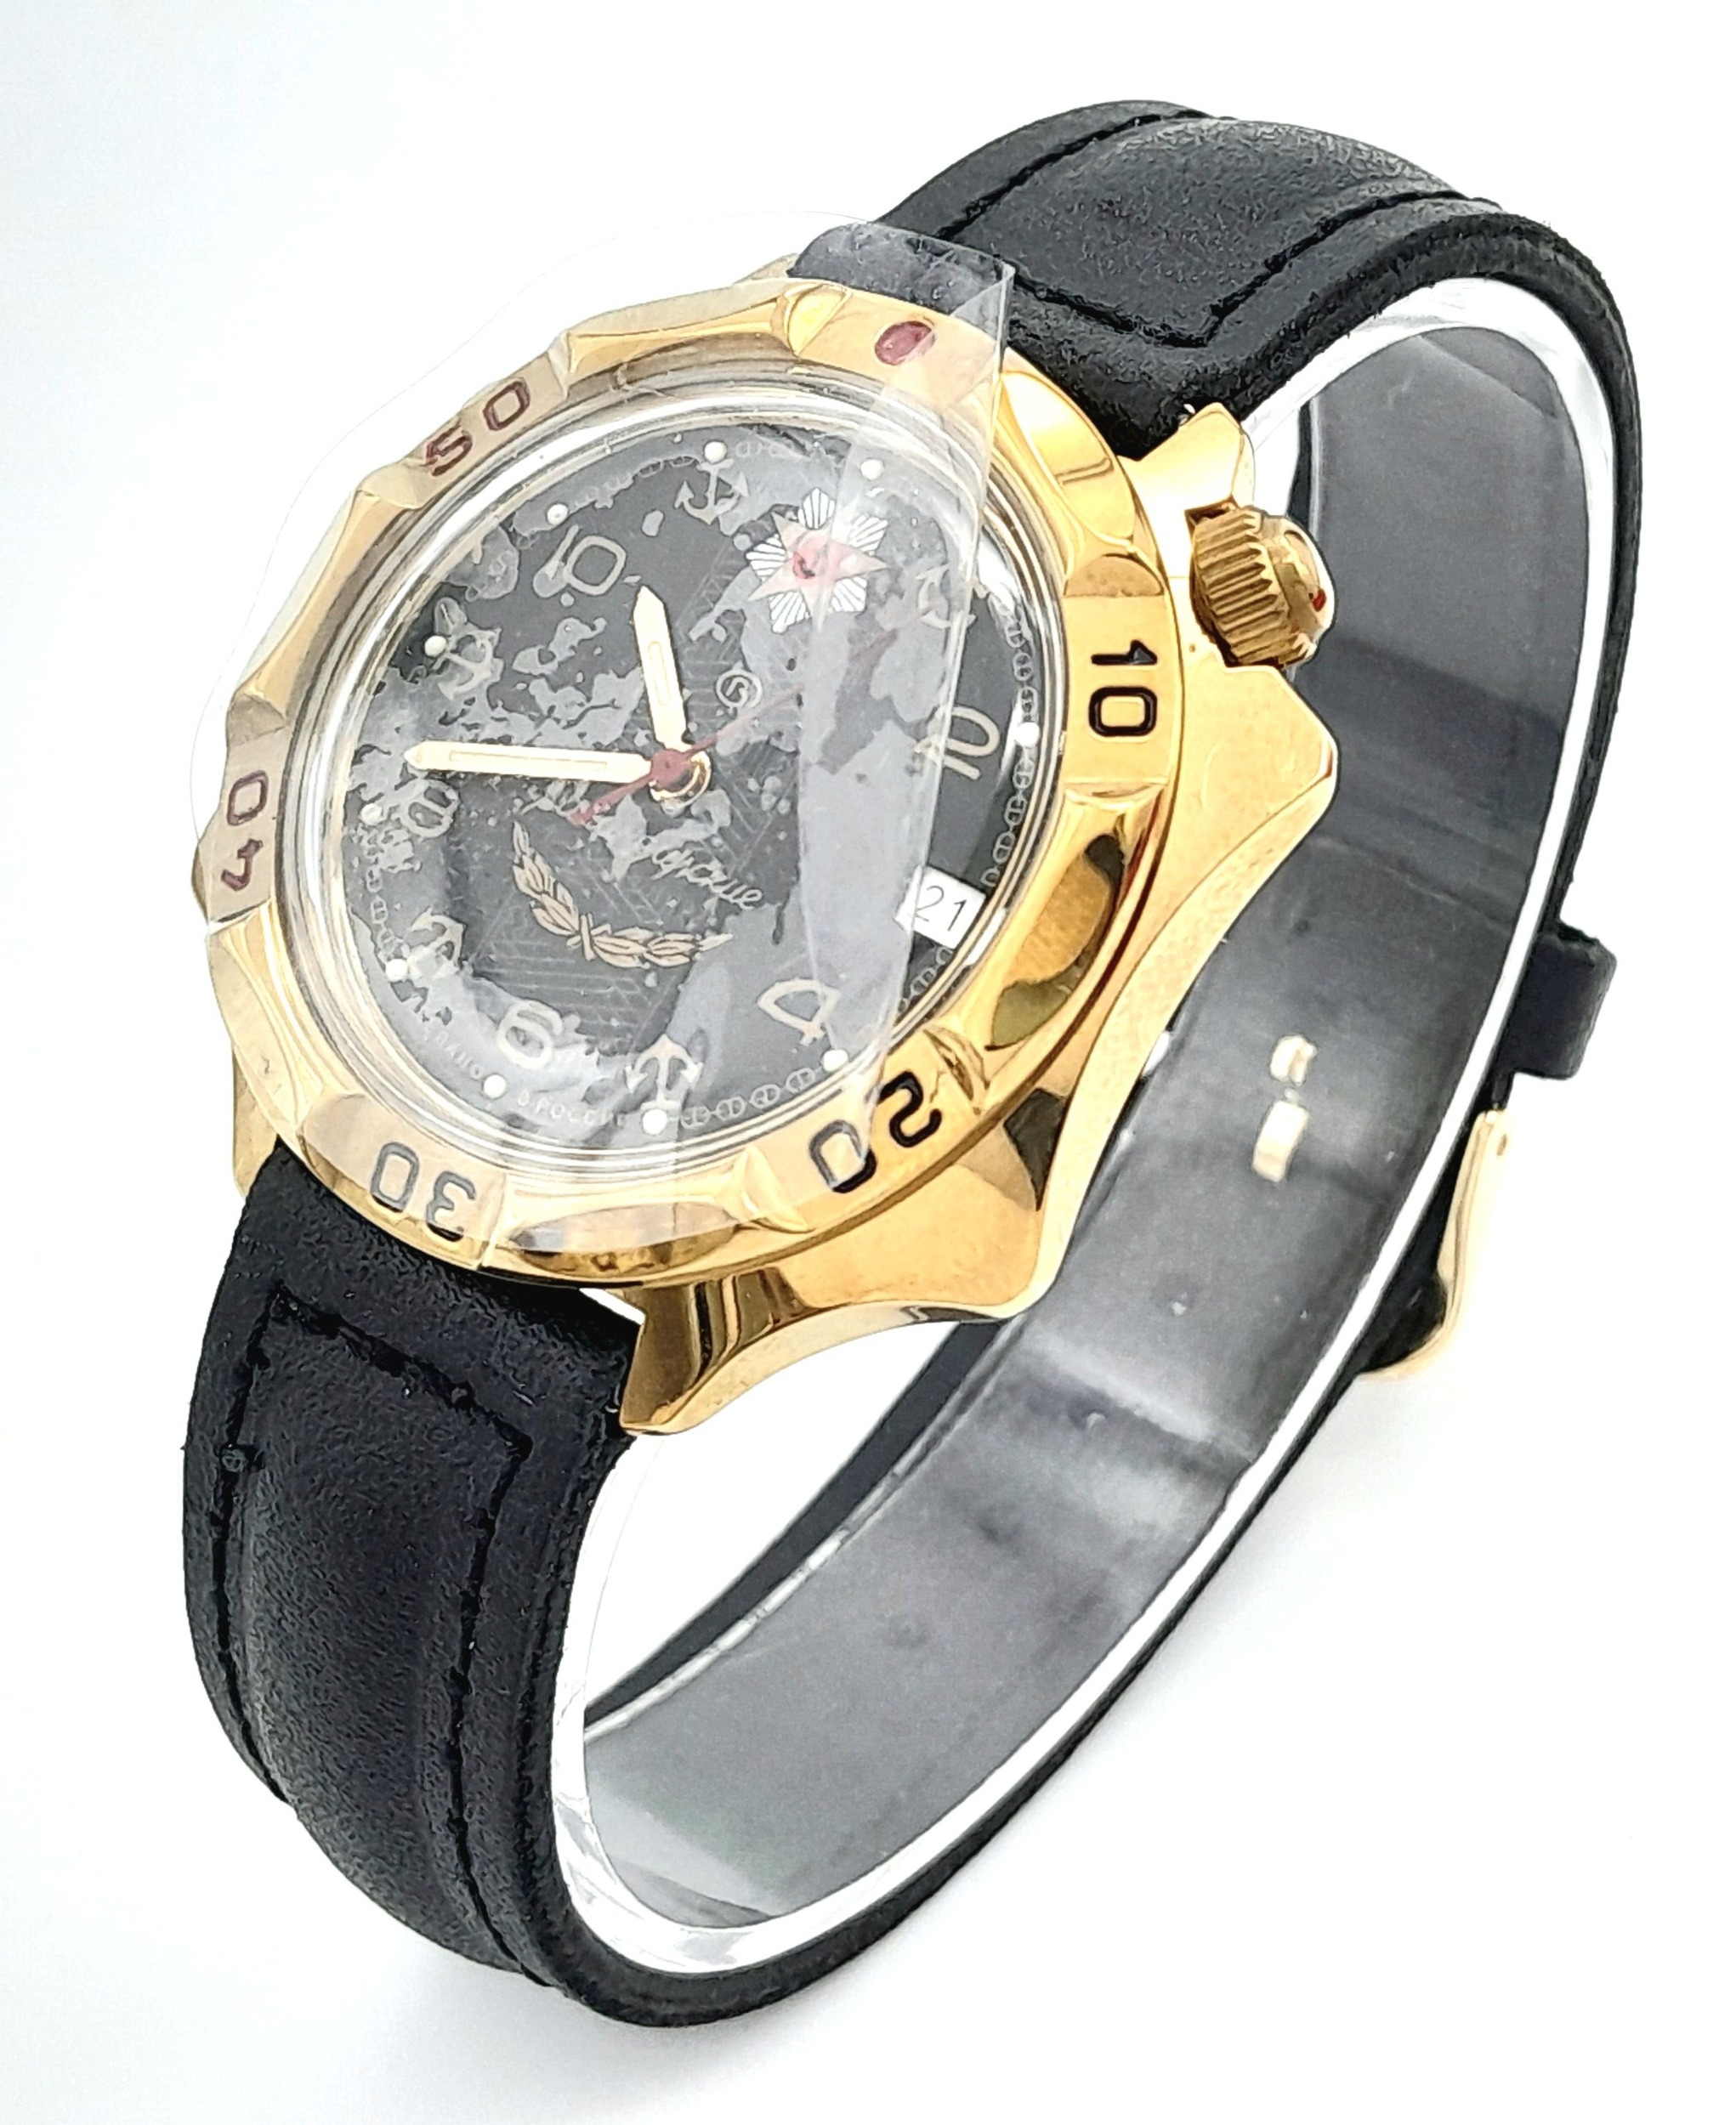 A Vostok Automatic Gents Watch. Black leather strap. Stainless steel gilded case - 40mm. Black